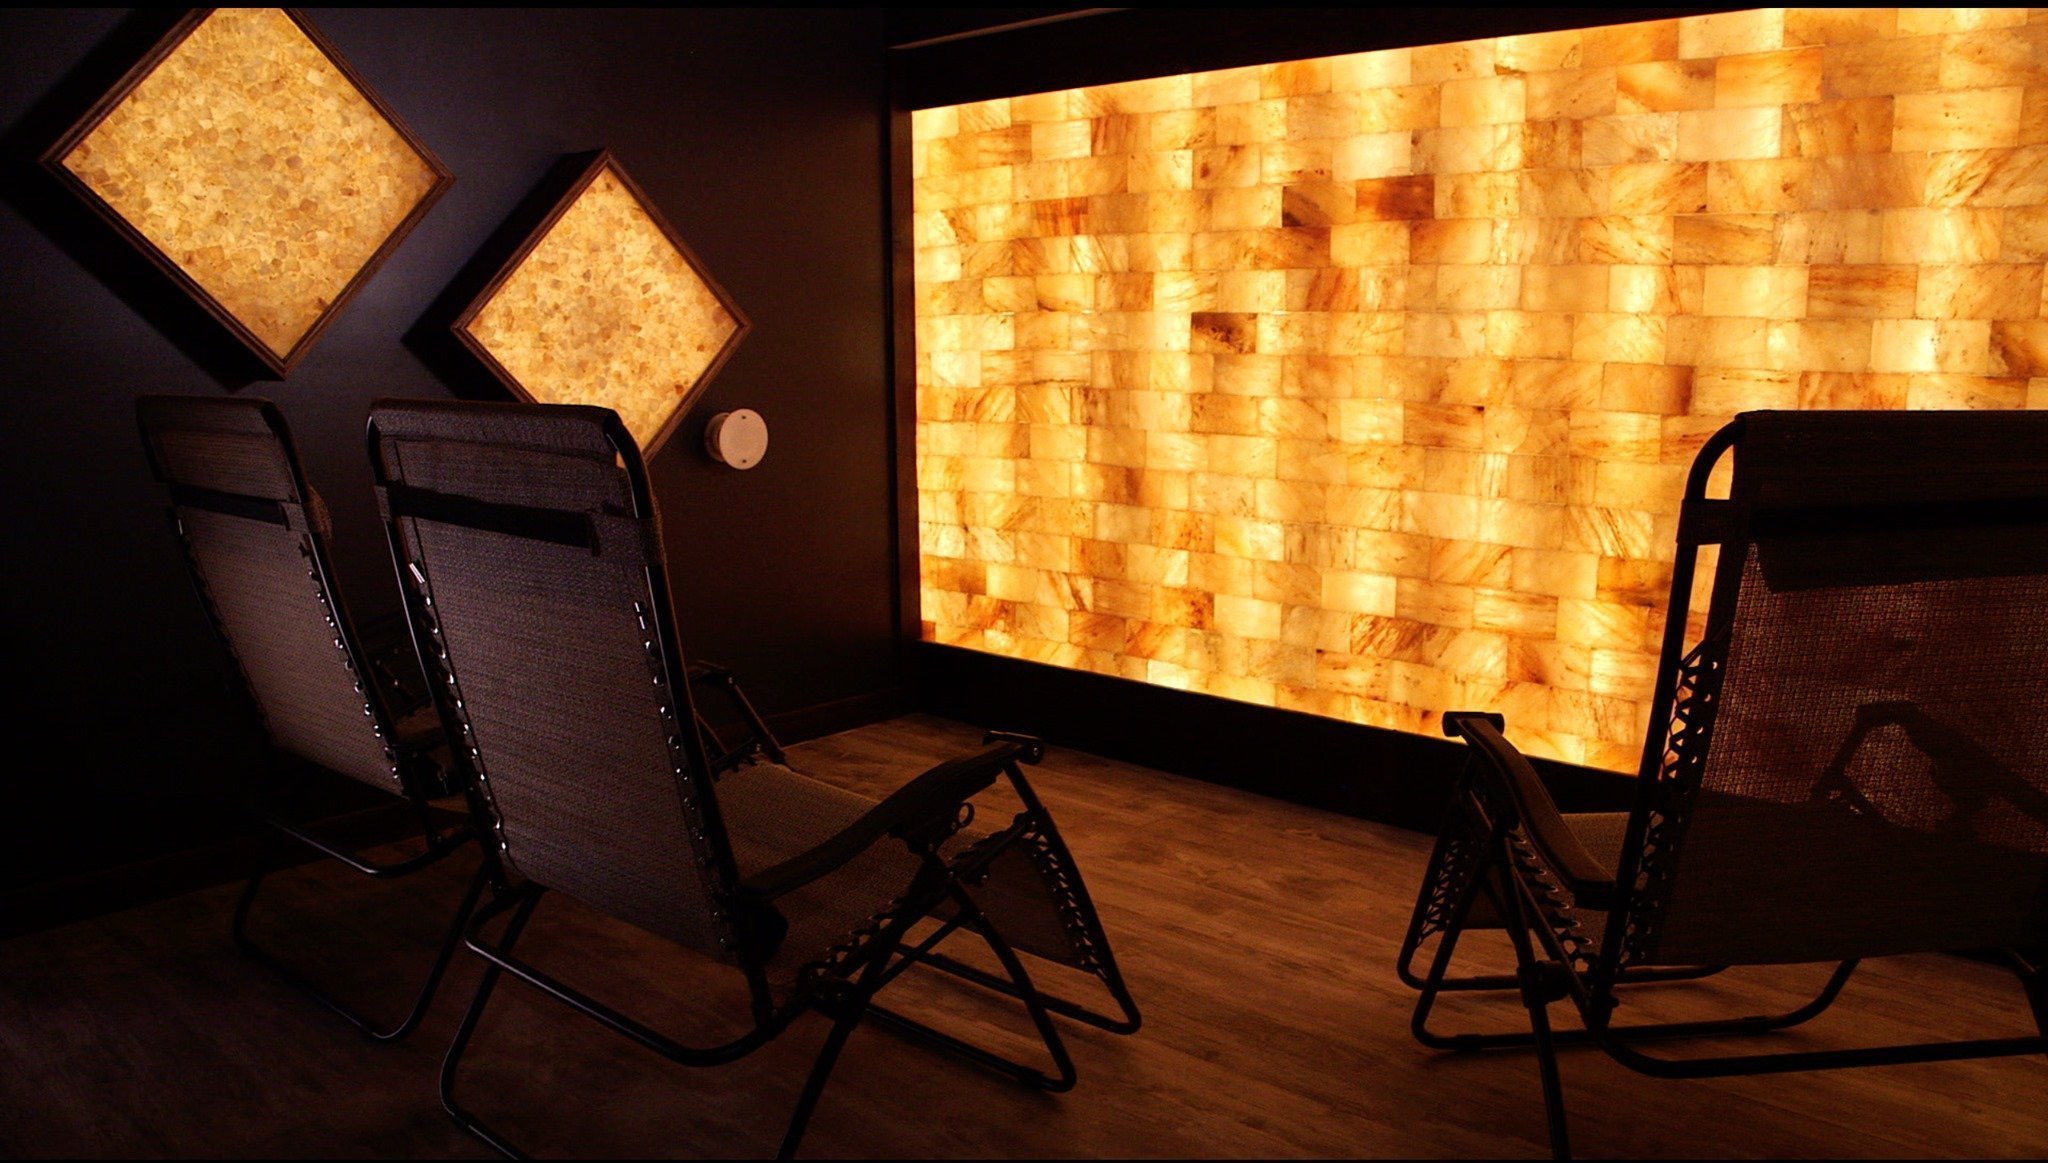 Three reclining chairs on a brown wooden floor in front of an orange backlit salt wall with two diamond orange backlit salt stone decor.